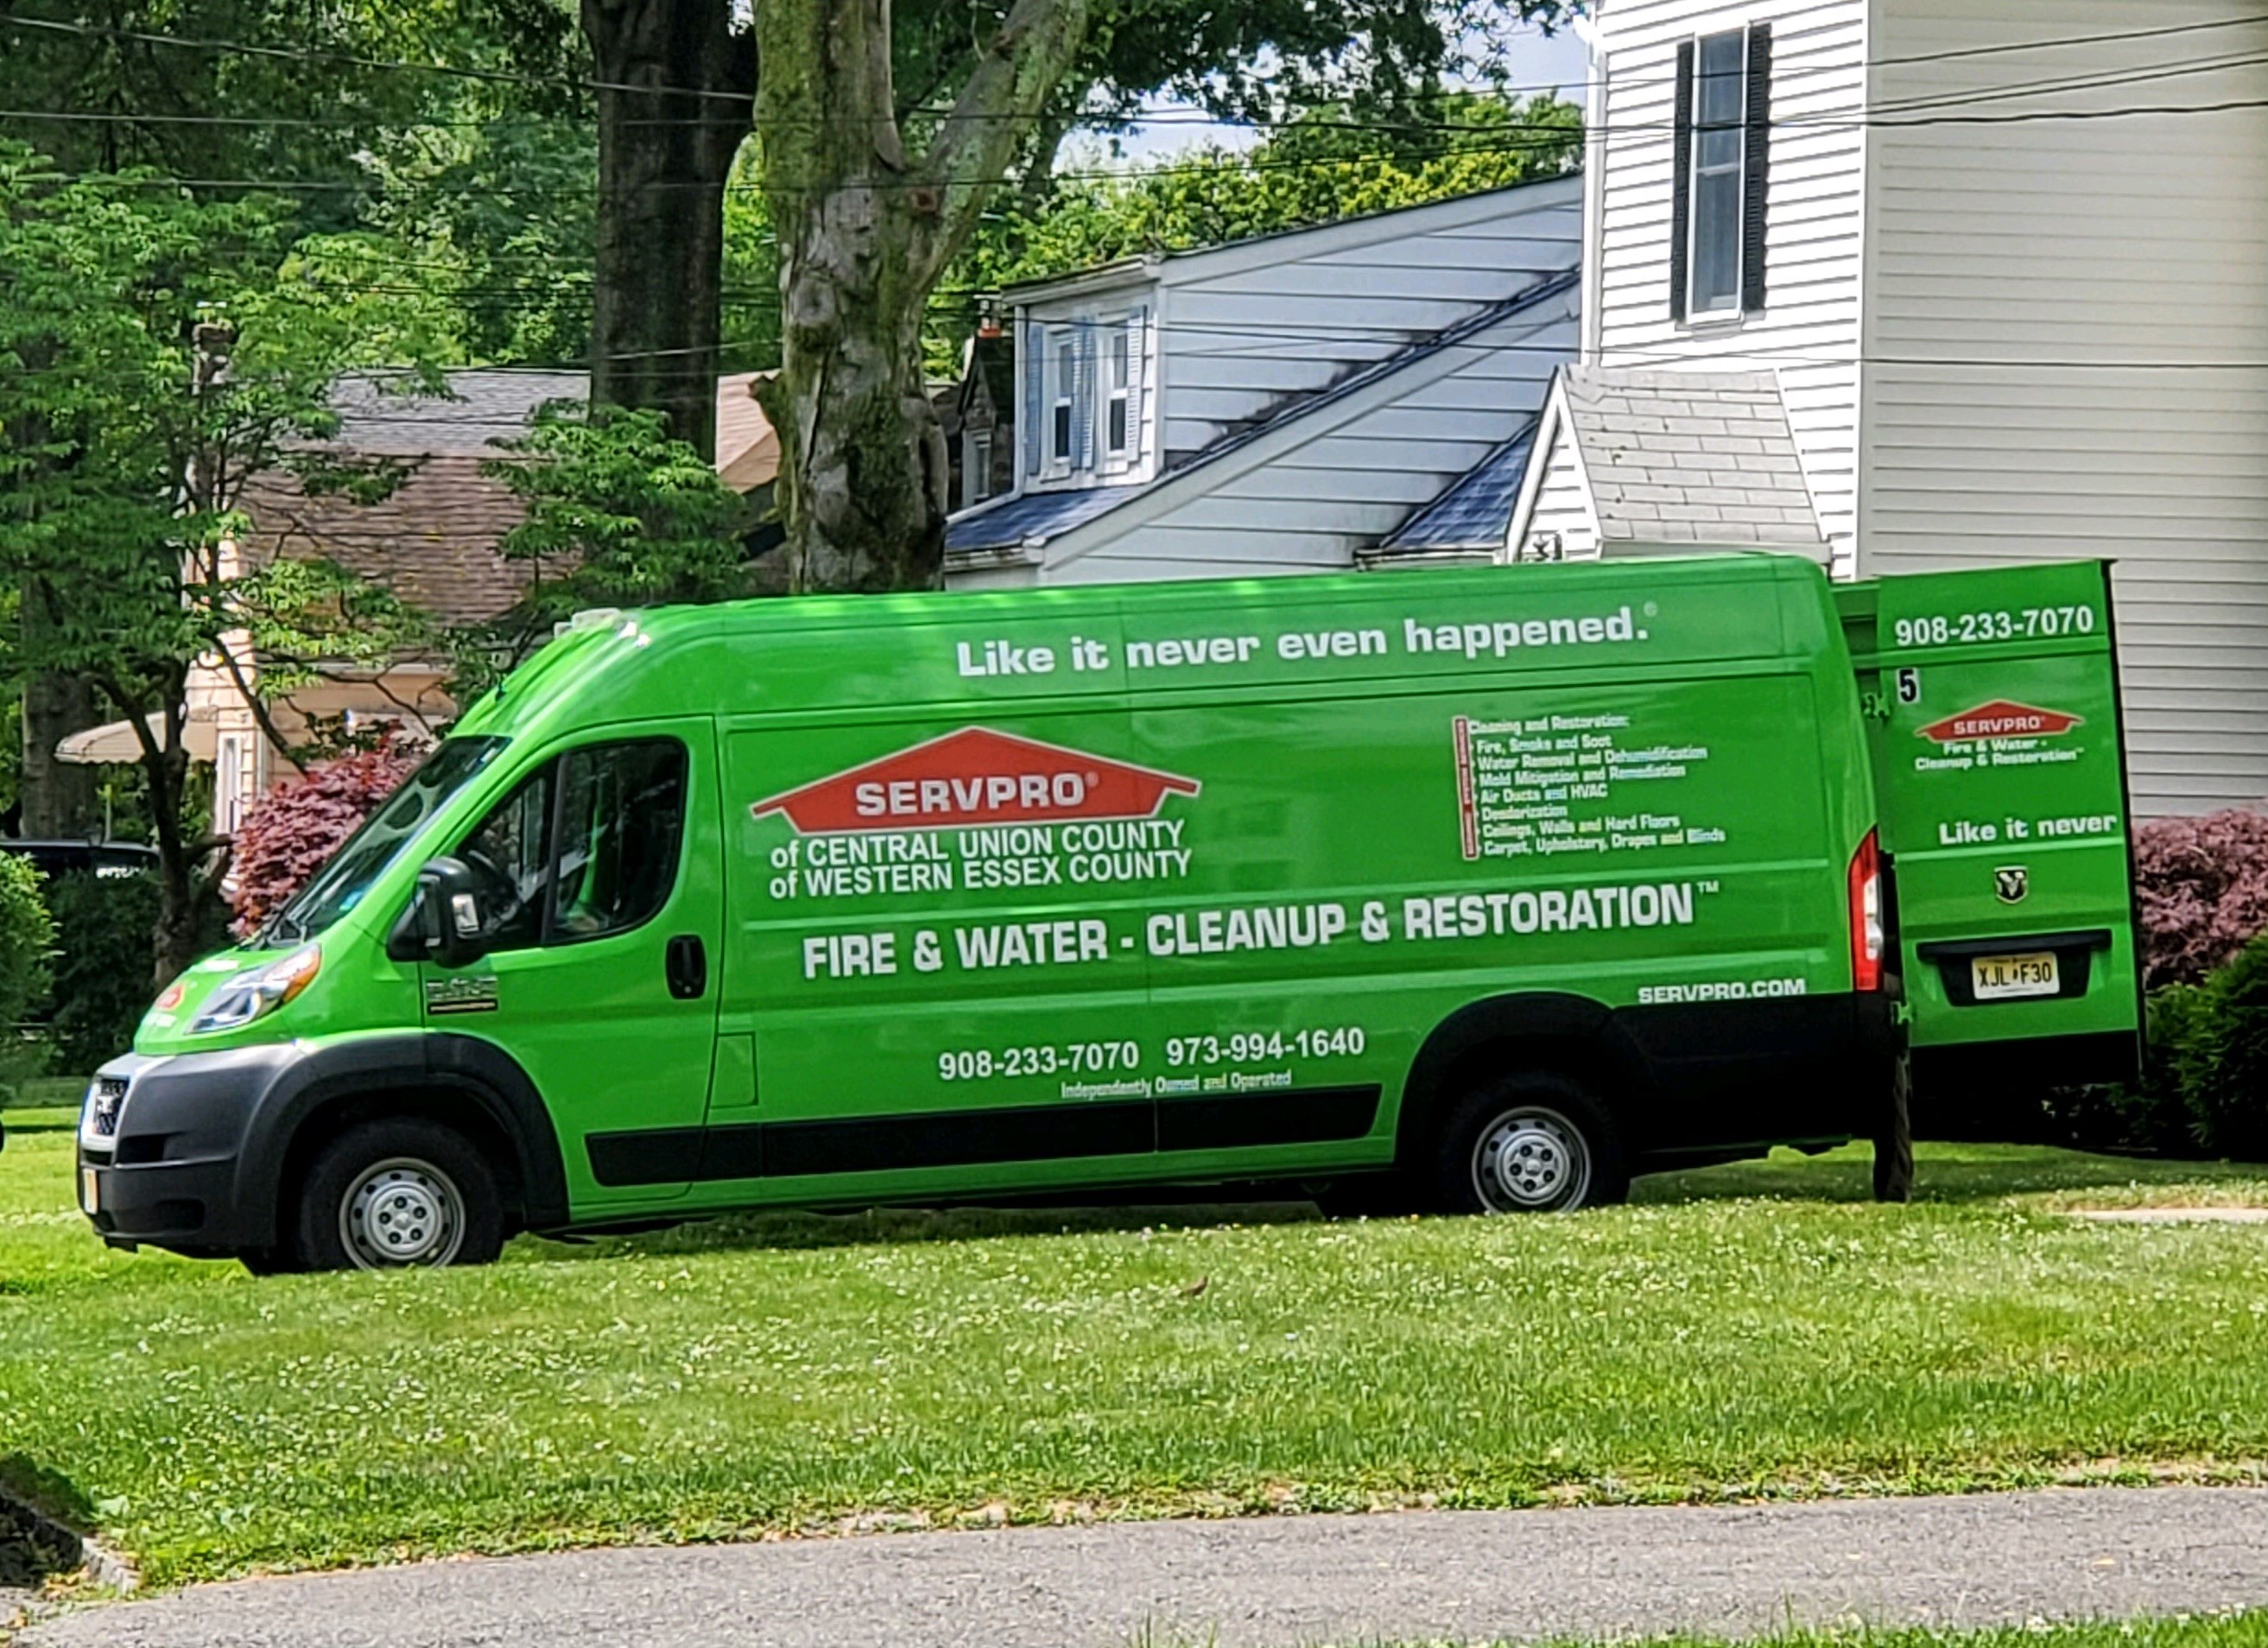 SERVPRO Team Spinner van of Central Union County and Western Essex